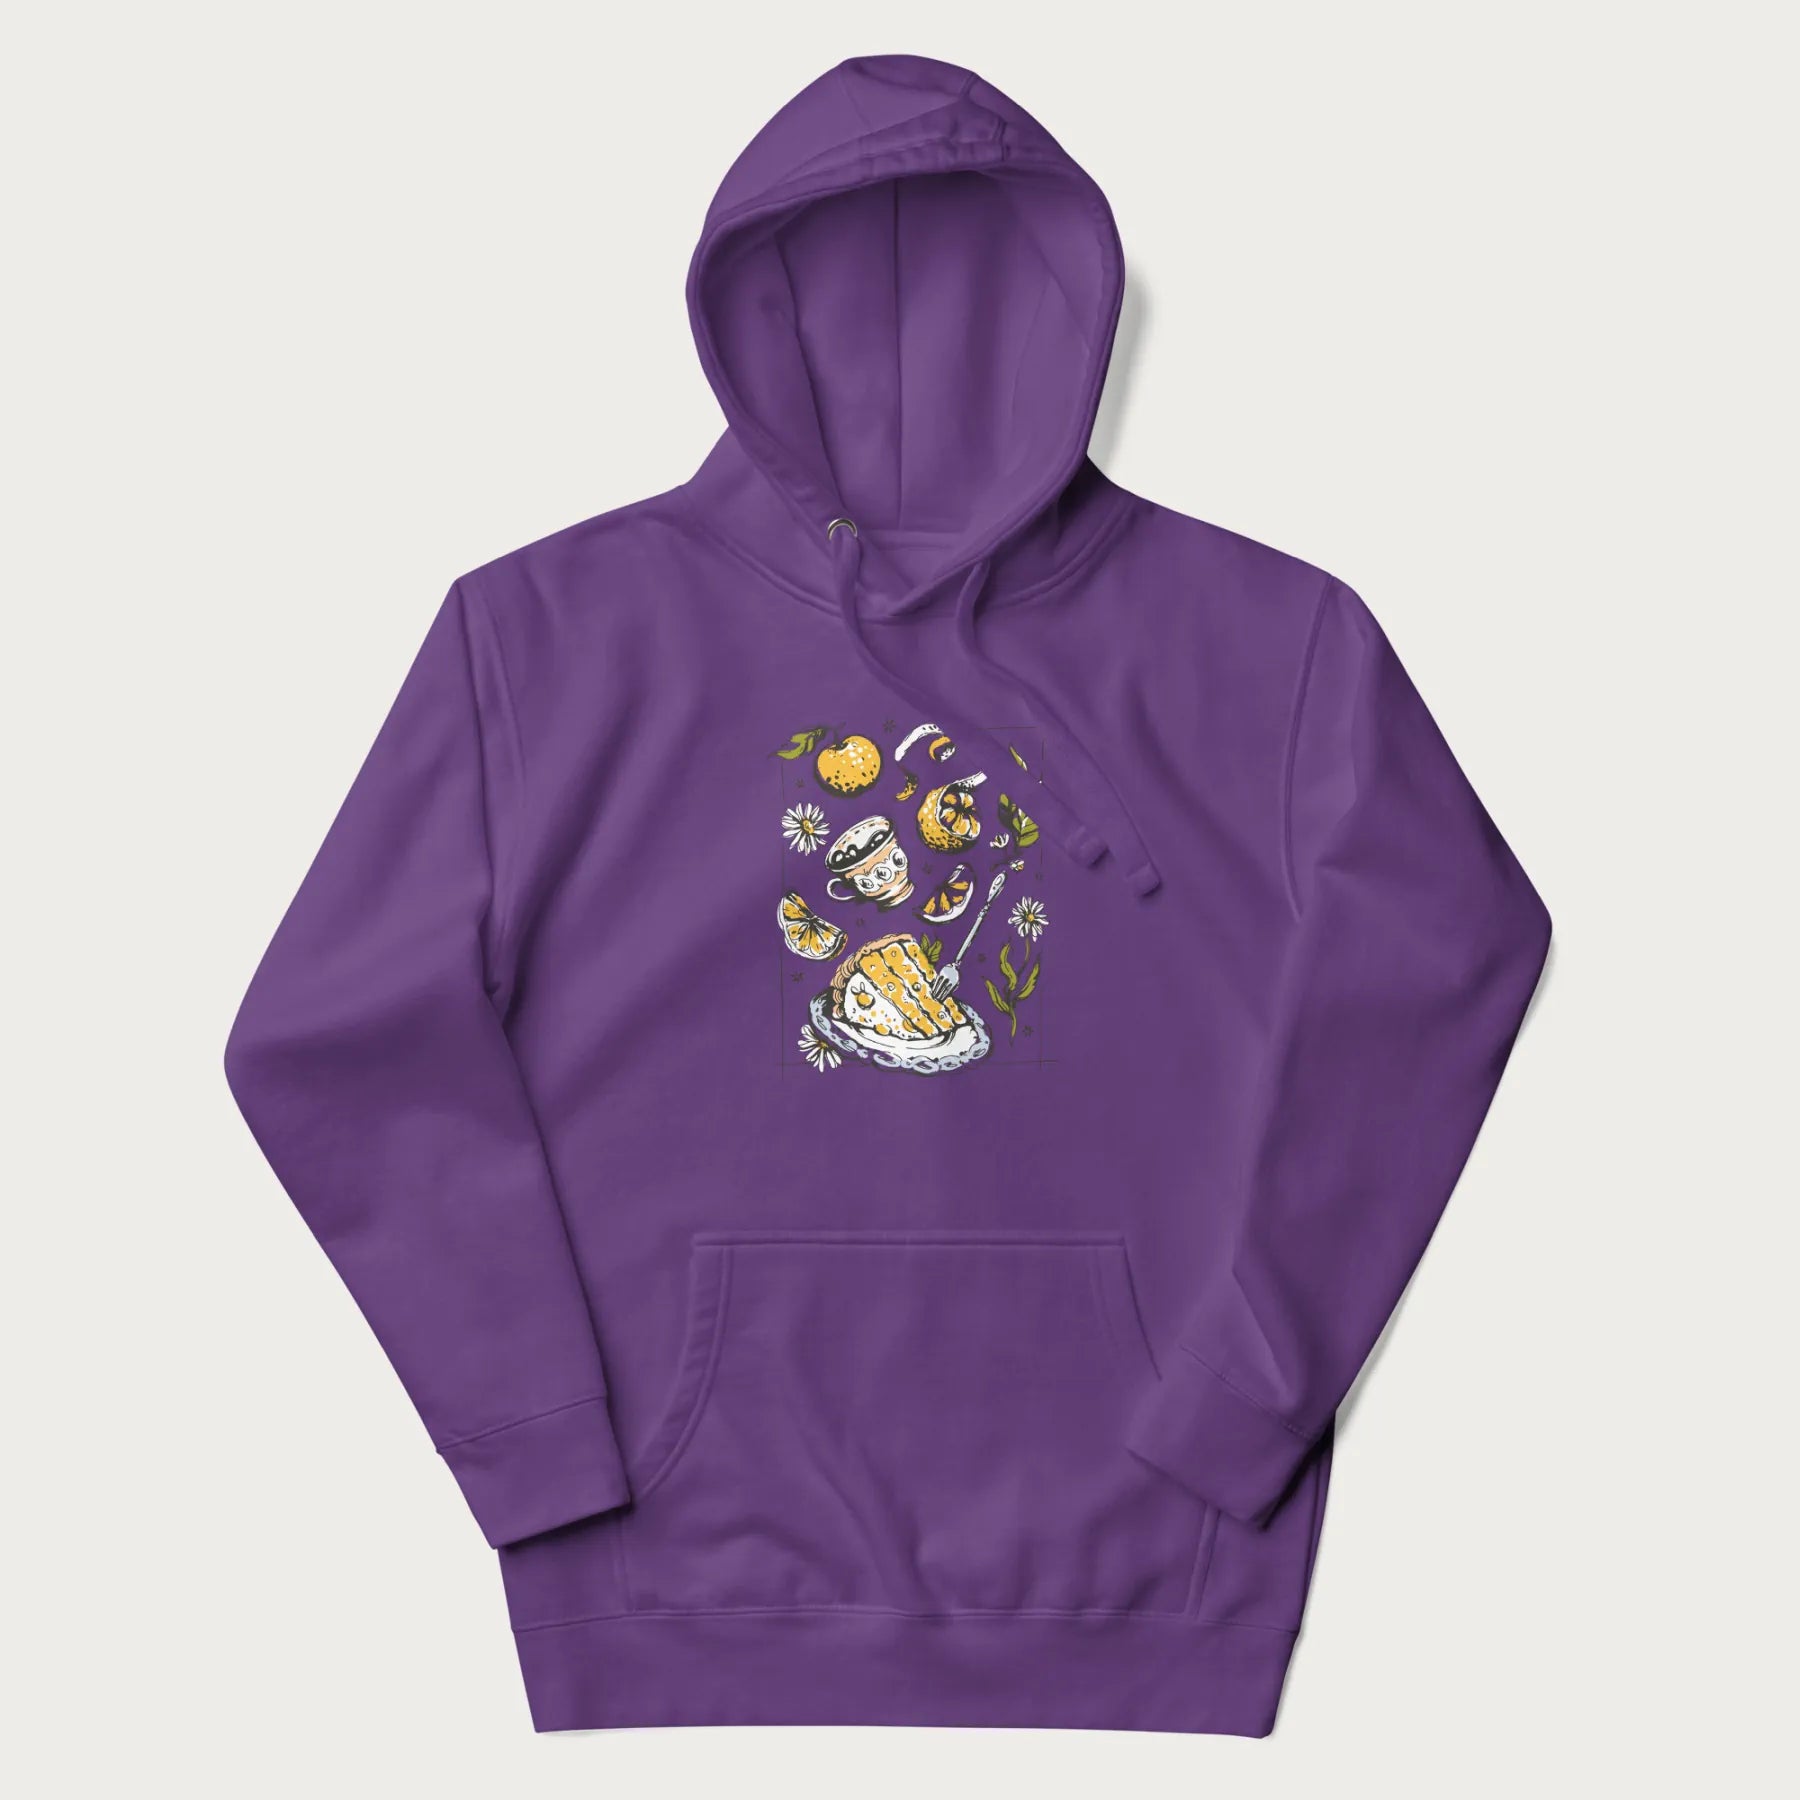 Purple hoodie featuring a Cottagecore-themed graphic with oranges, a floral porcelain cup, orange pie, and daisies.